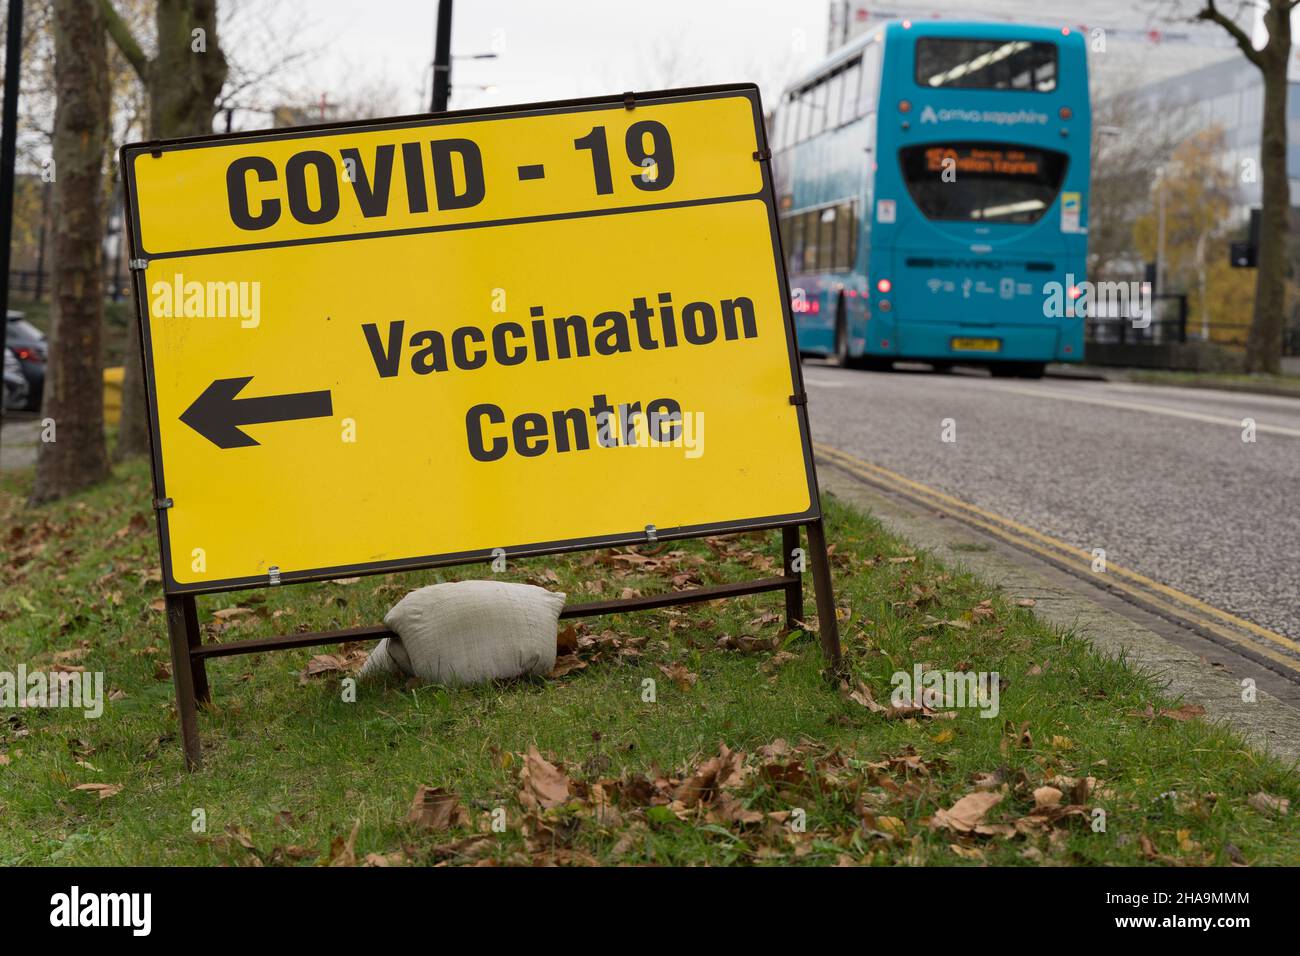 Milton Keynes, UK. 11th Dec, 2021. COVID-19 vaccination Centre road sign posted, welcome general public to take Coronavirus vaccine to combat the latest Omicron variant among the other variants in the Borough of Milton Keynes in Buckinghamshire England. Credit: xiu bao/Alamy Live News Stock Photo